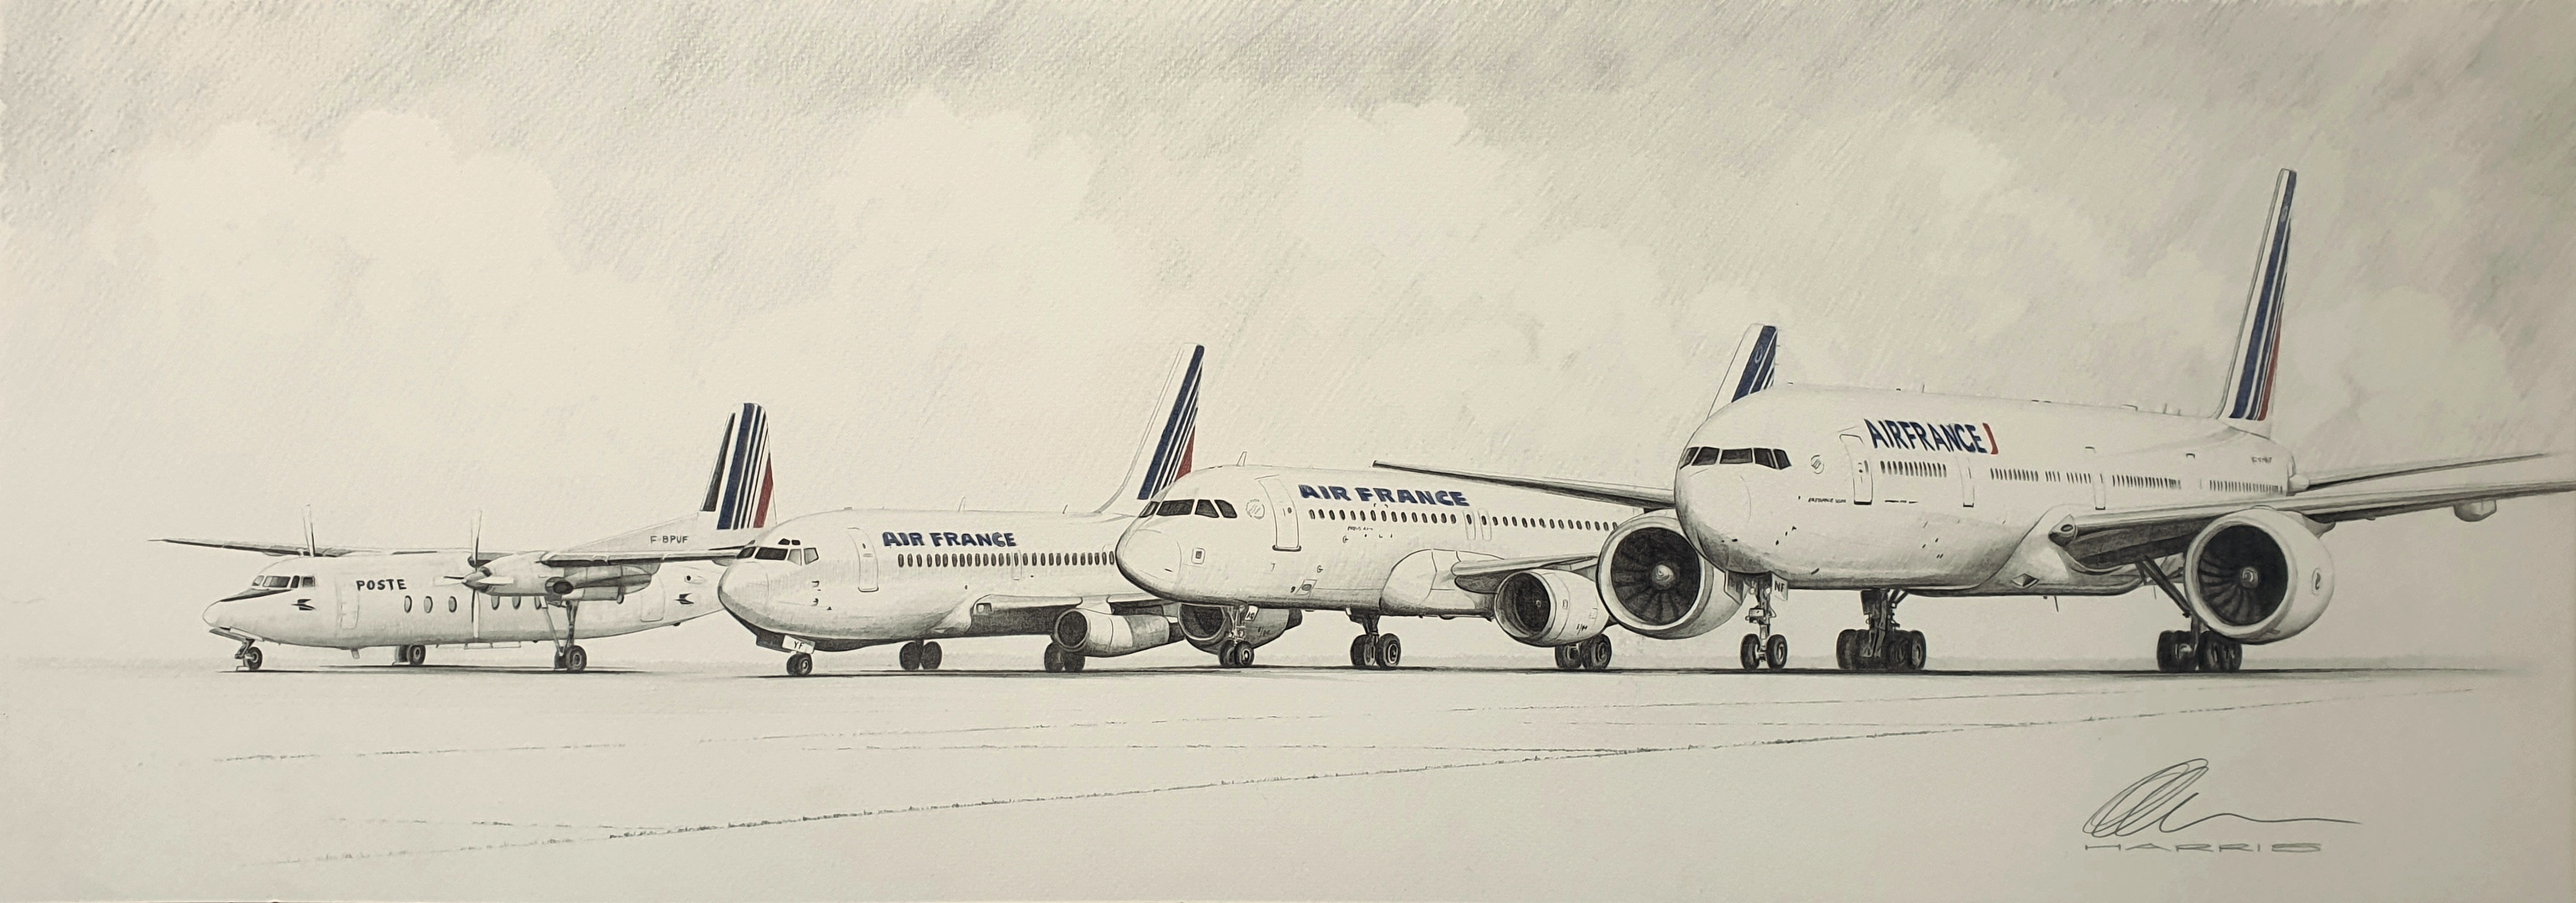 Air_France_Airliners